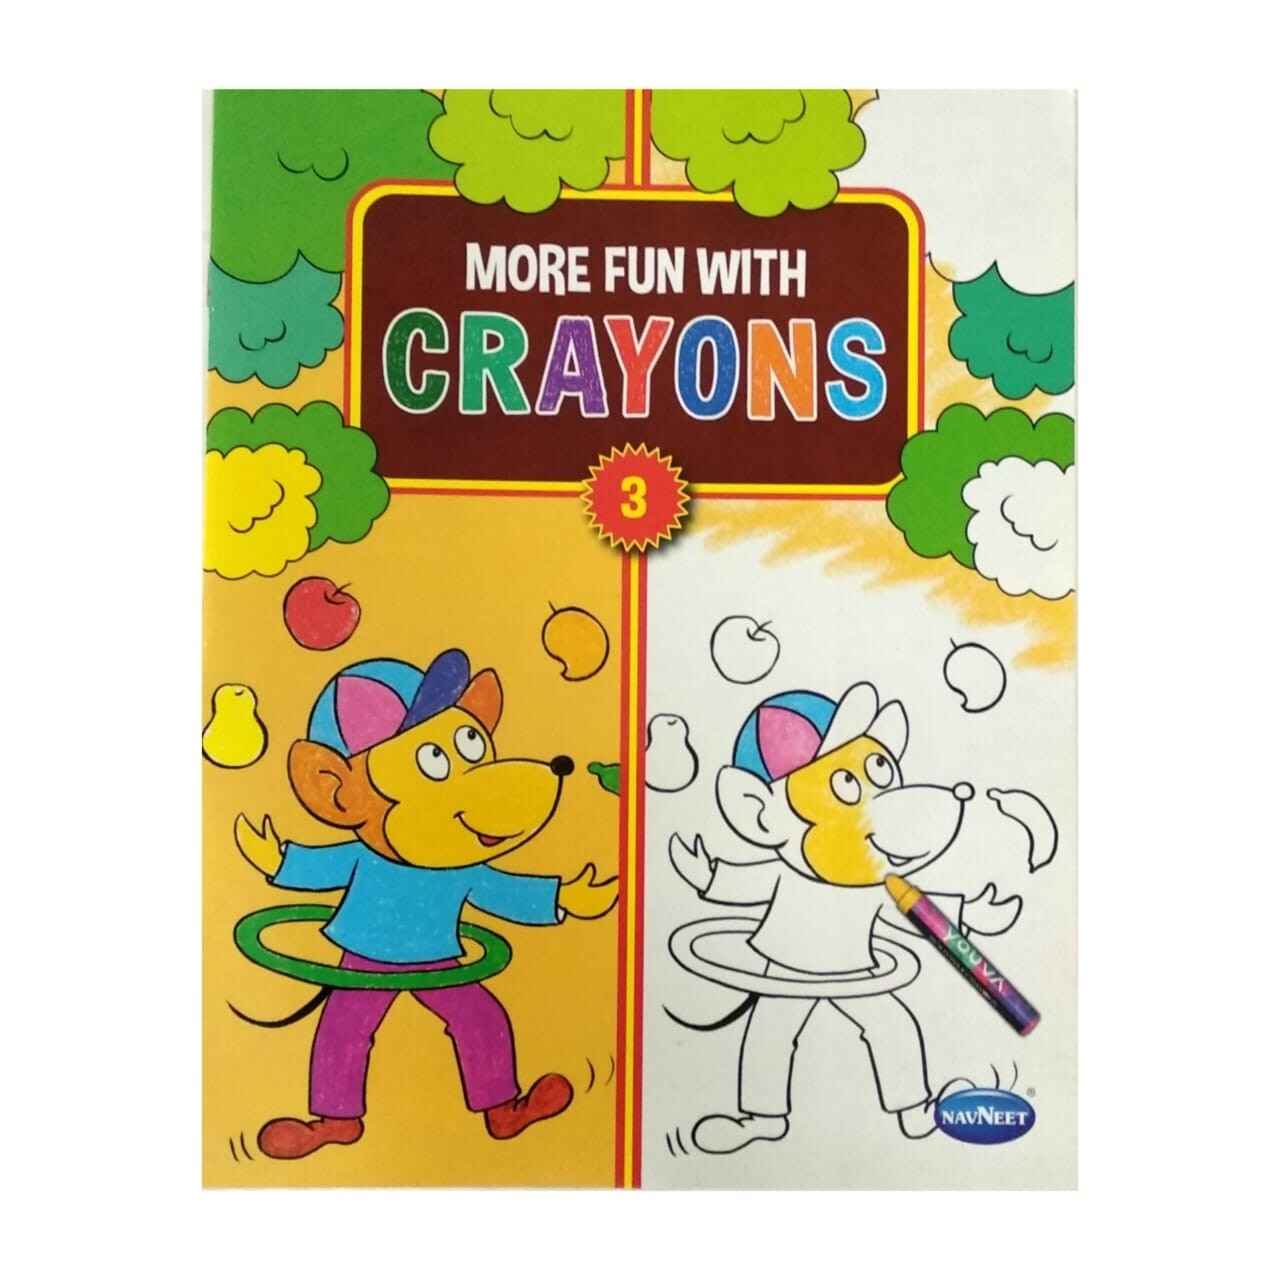 More Fun With Crayons (Set Of 2 Books)